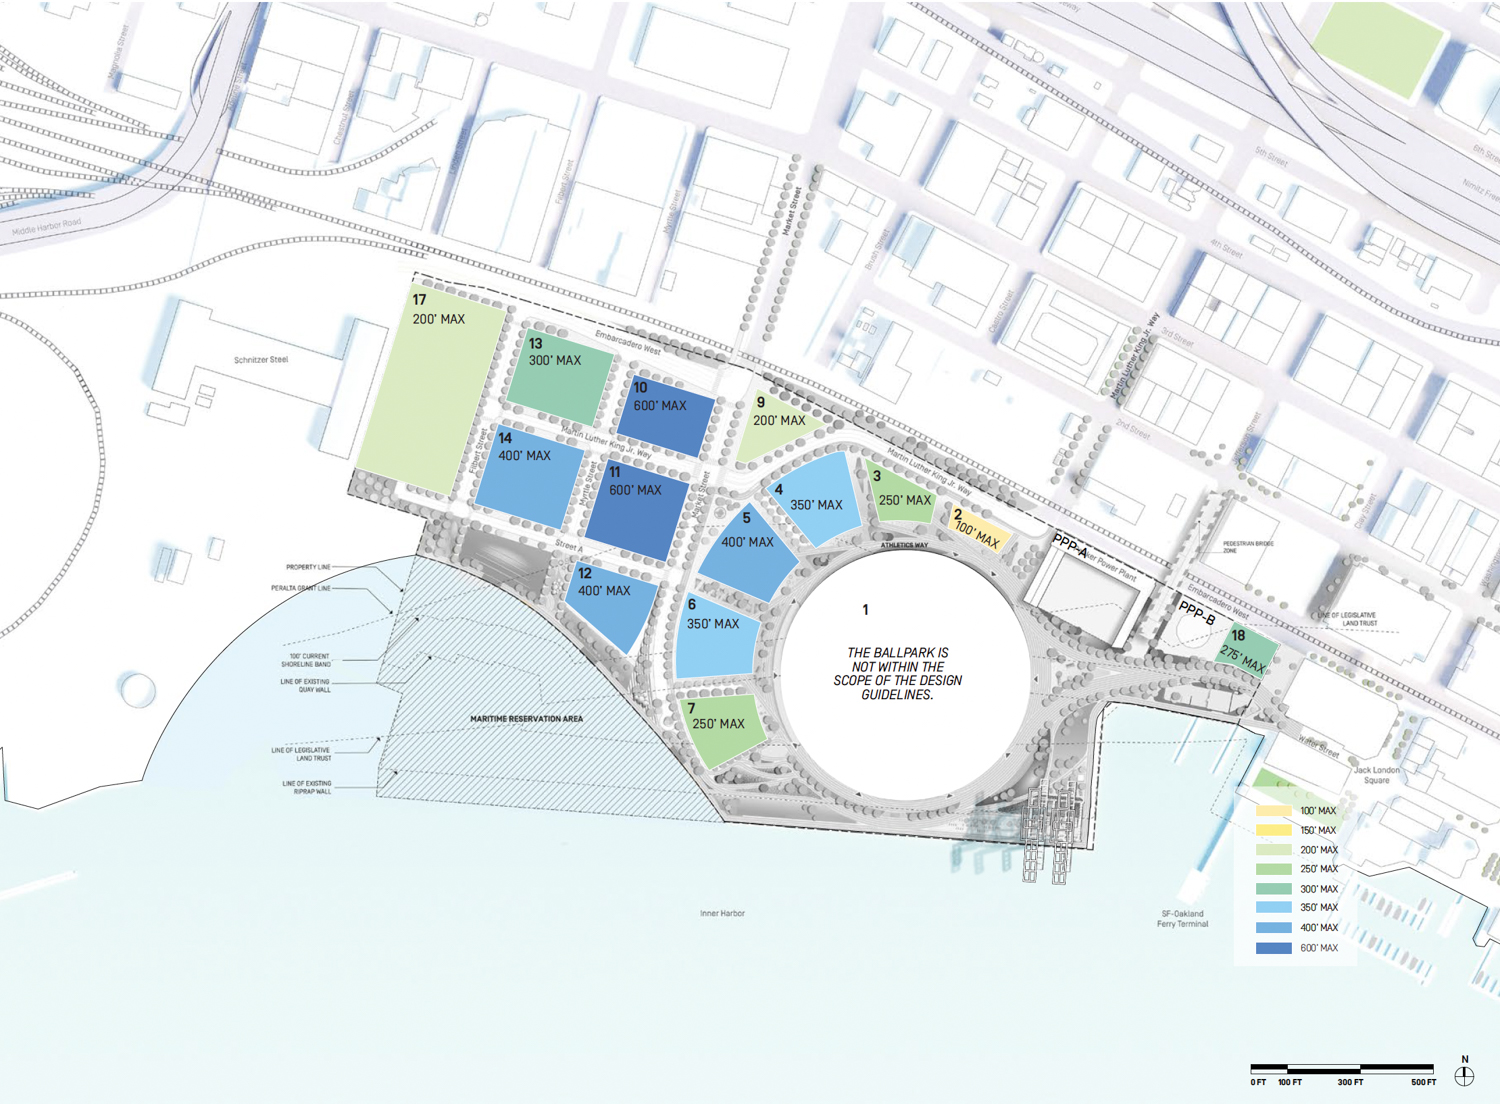 Howard Terminal Ballpark building heights in the Maritime Reservation Scenario, architecture by Bjarke Ingels Group